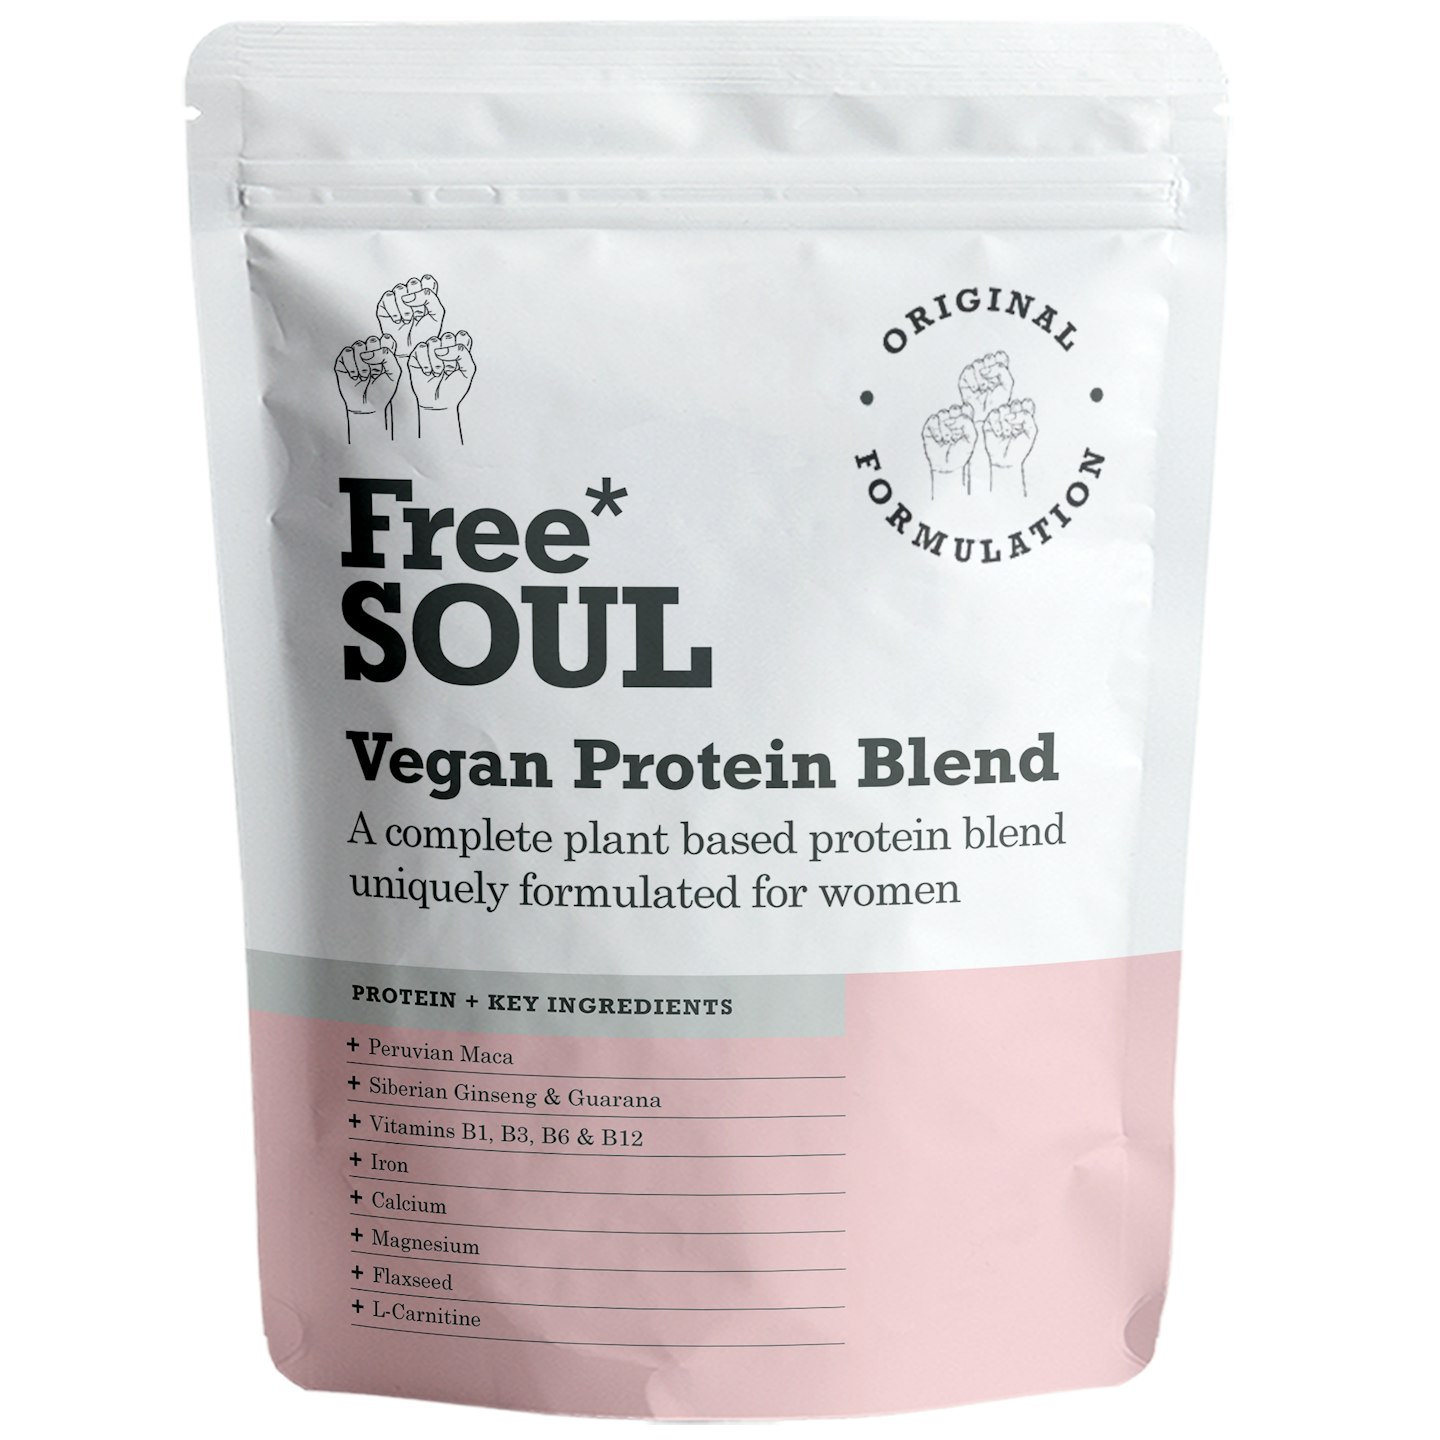 An image of Free Soul's Vegan Protein Blend